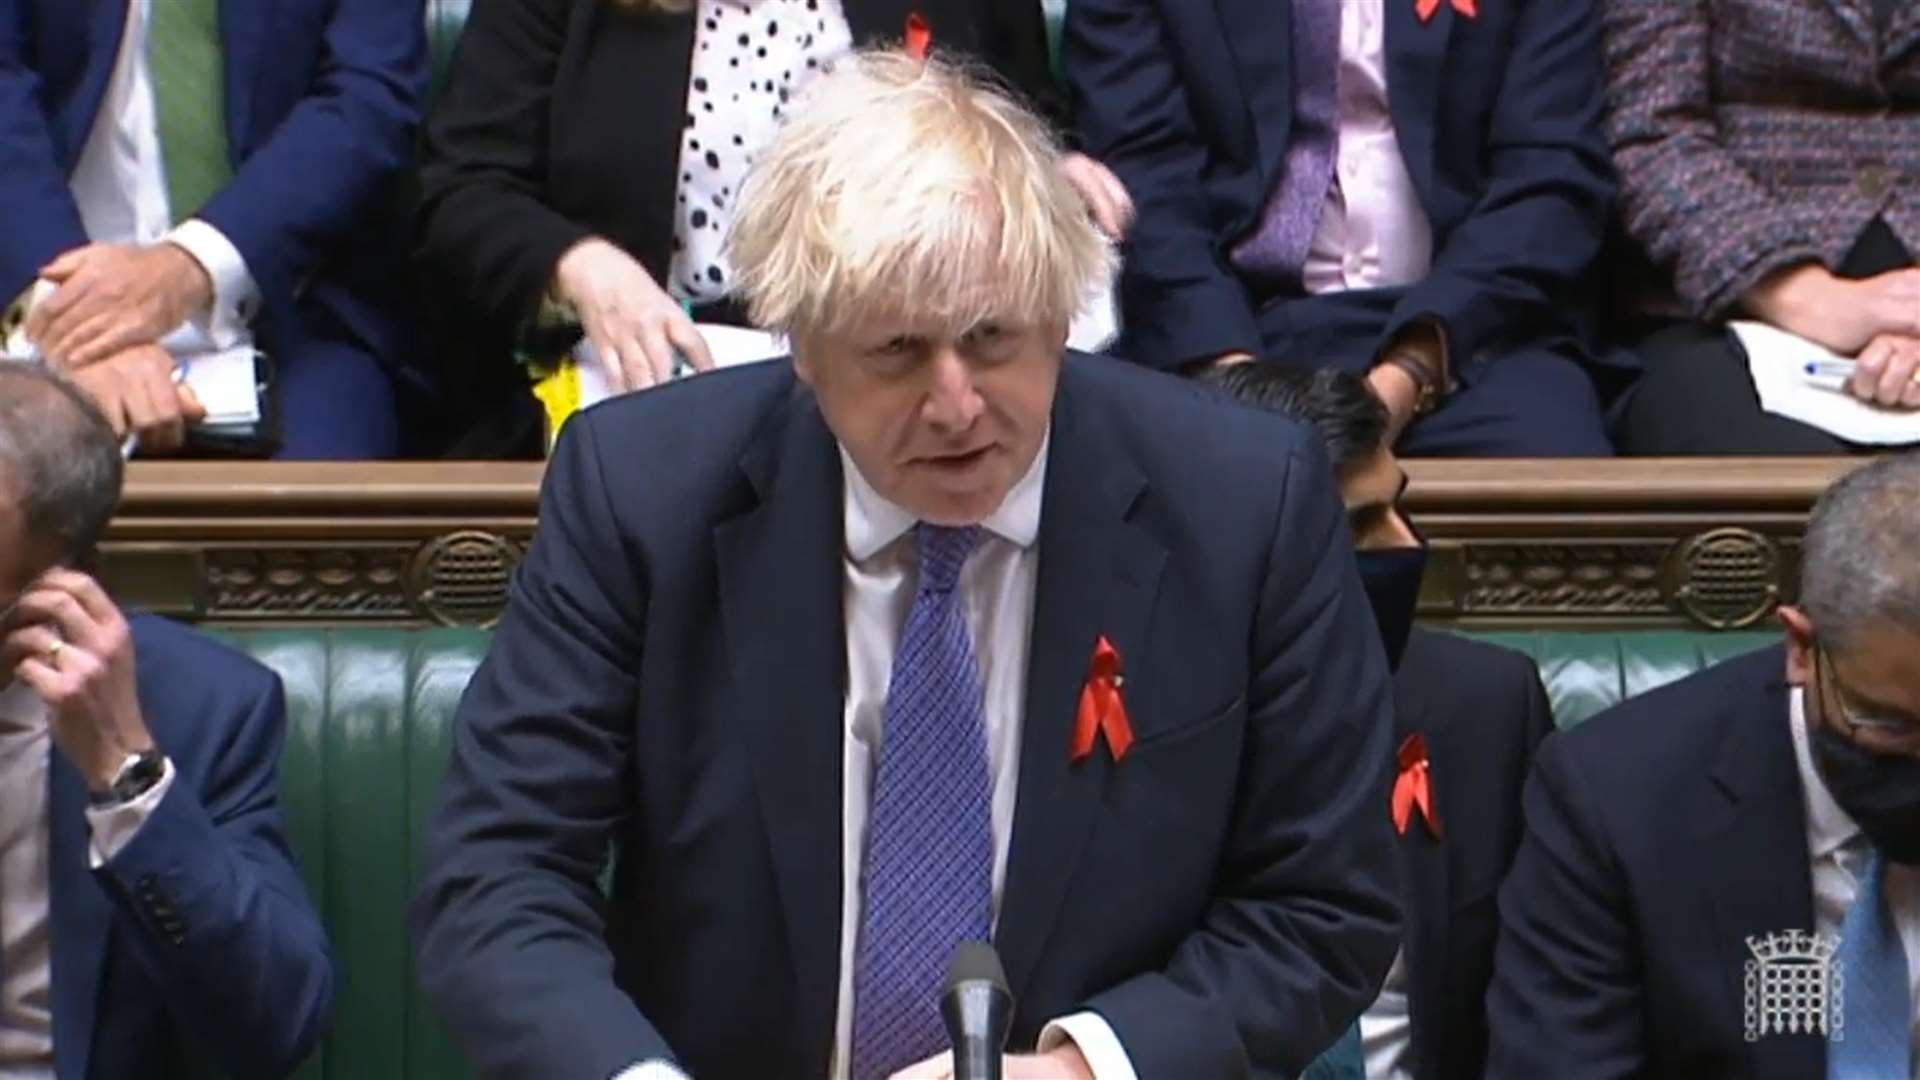 Addressing the claims in the Daily Mirror, Boris Johnson said Ian Blackford was ‘talking total nonsense’ (House of Commons/PA)